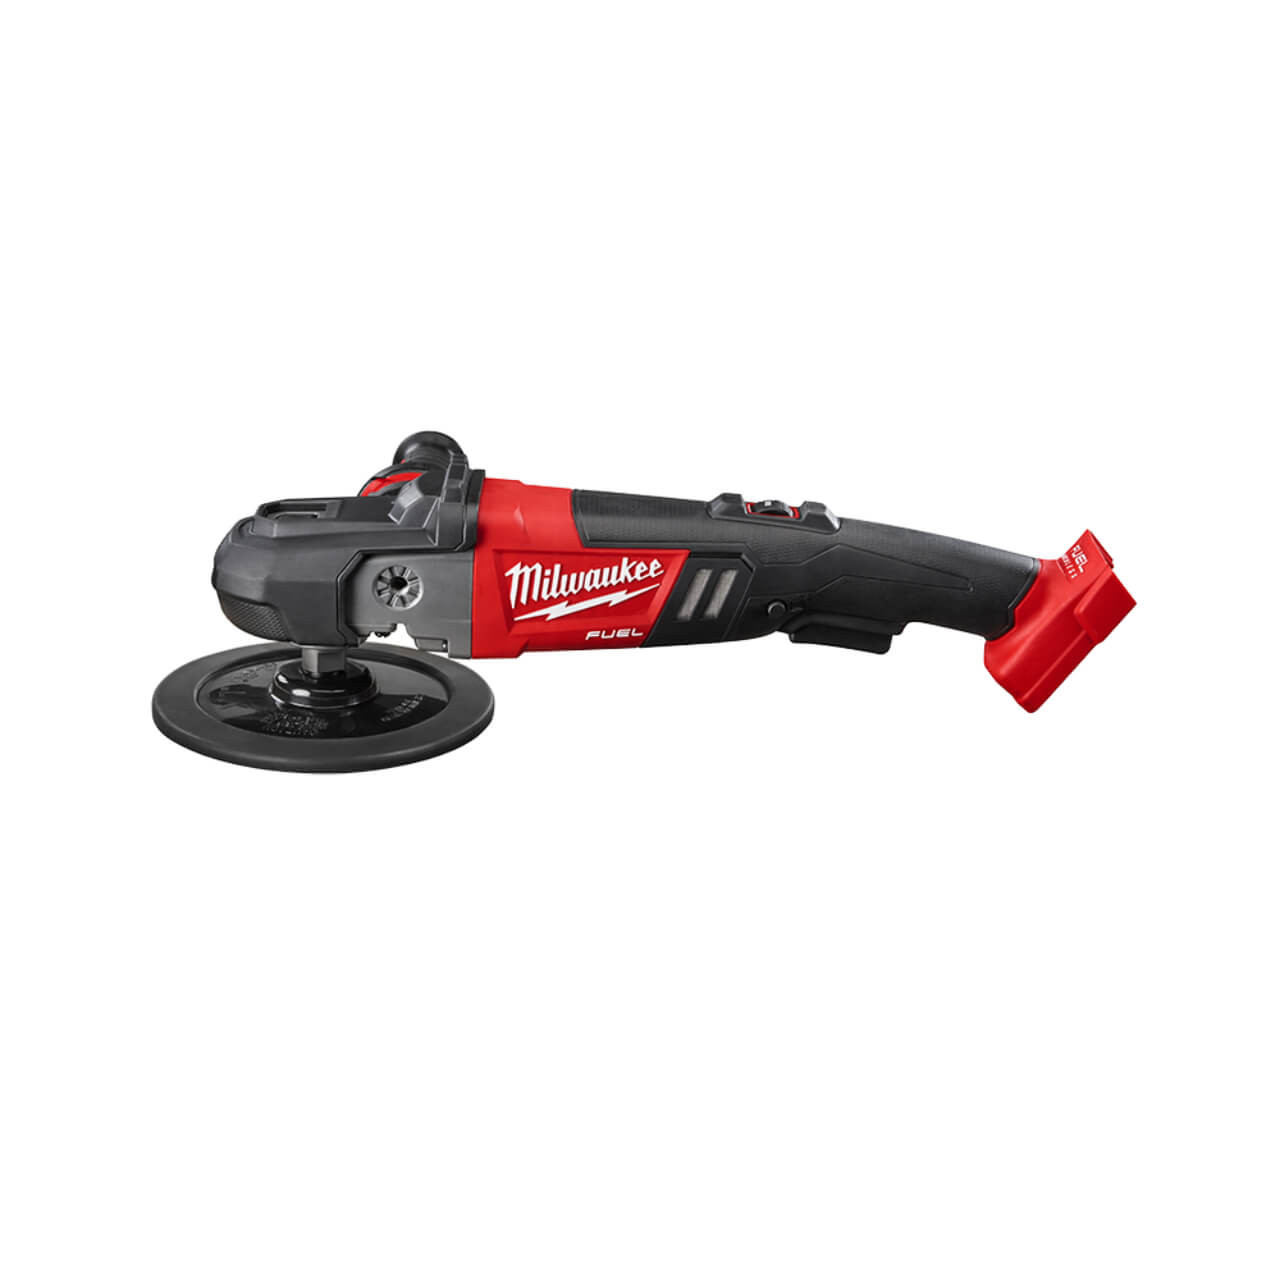 Milwaukee M18 Fuel Cordless 180mm Variable Speed Polisher Skin Only